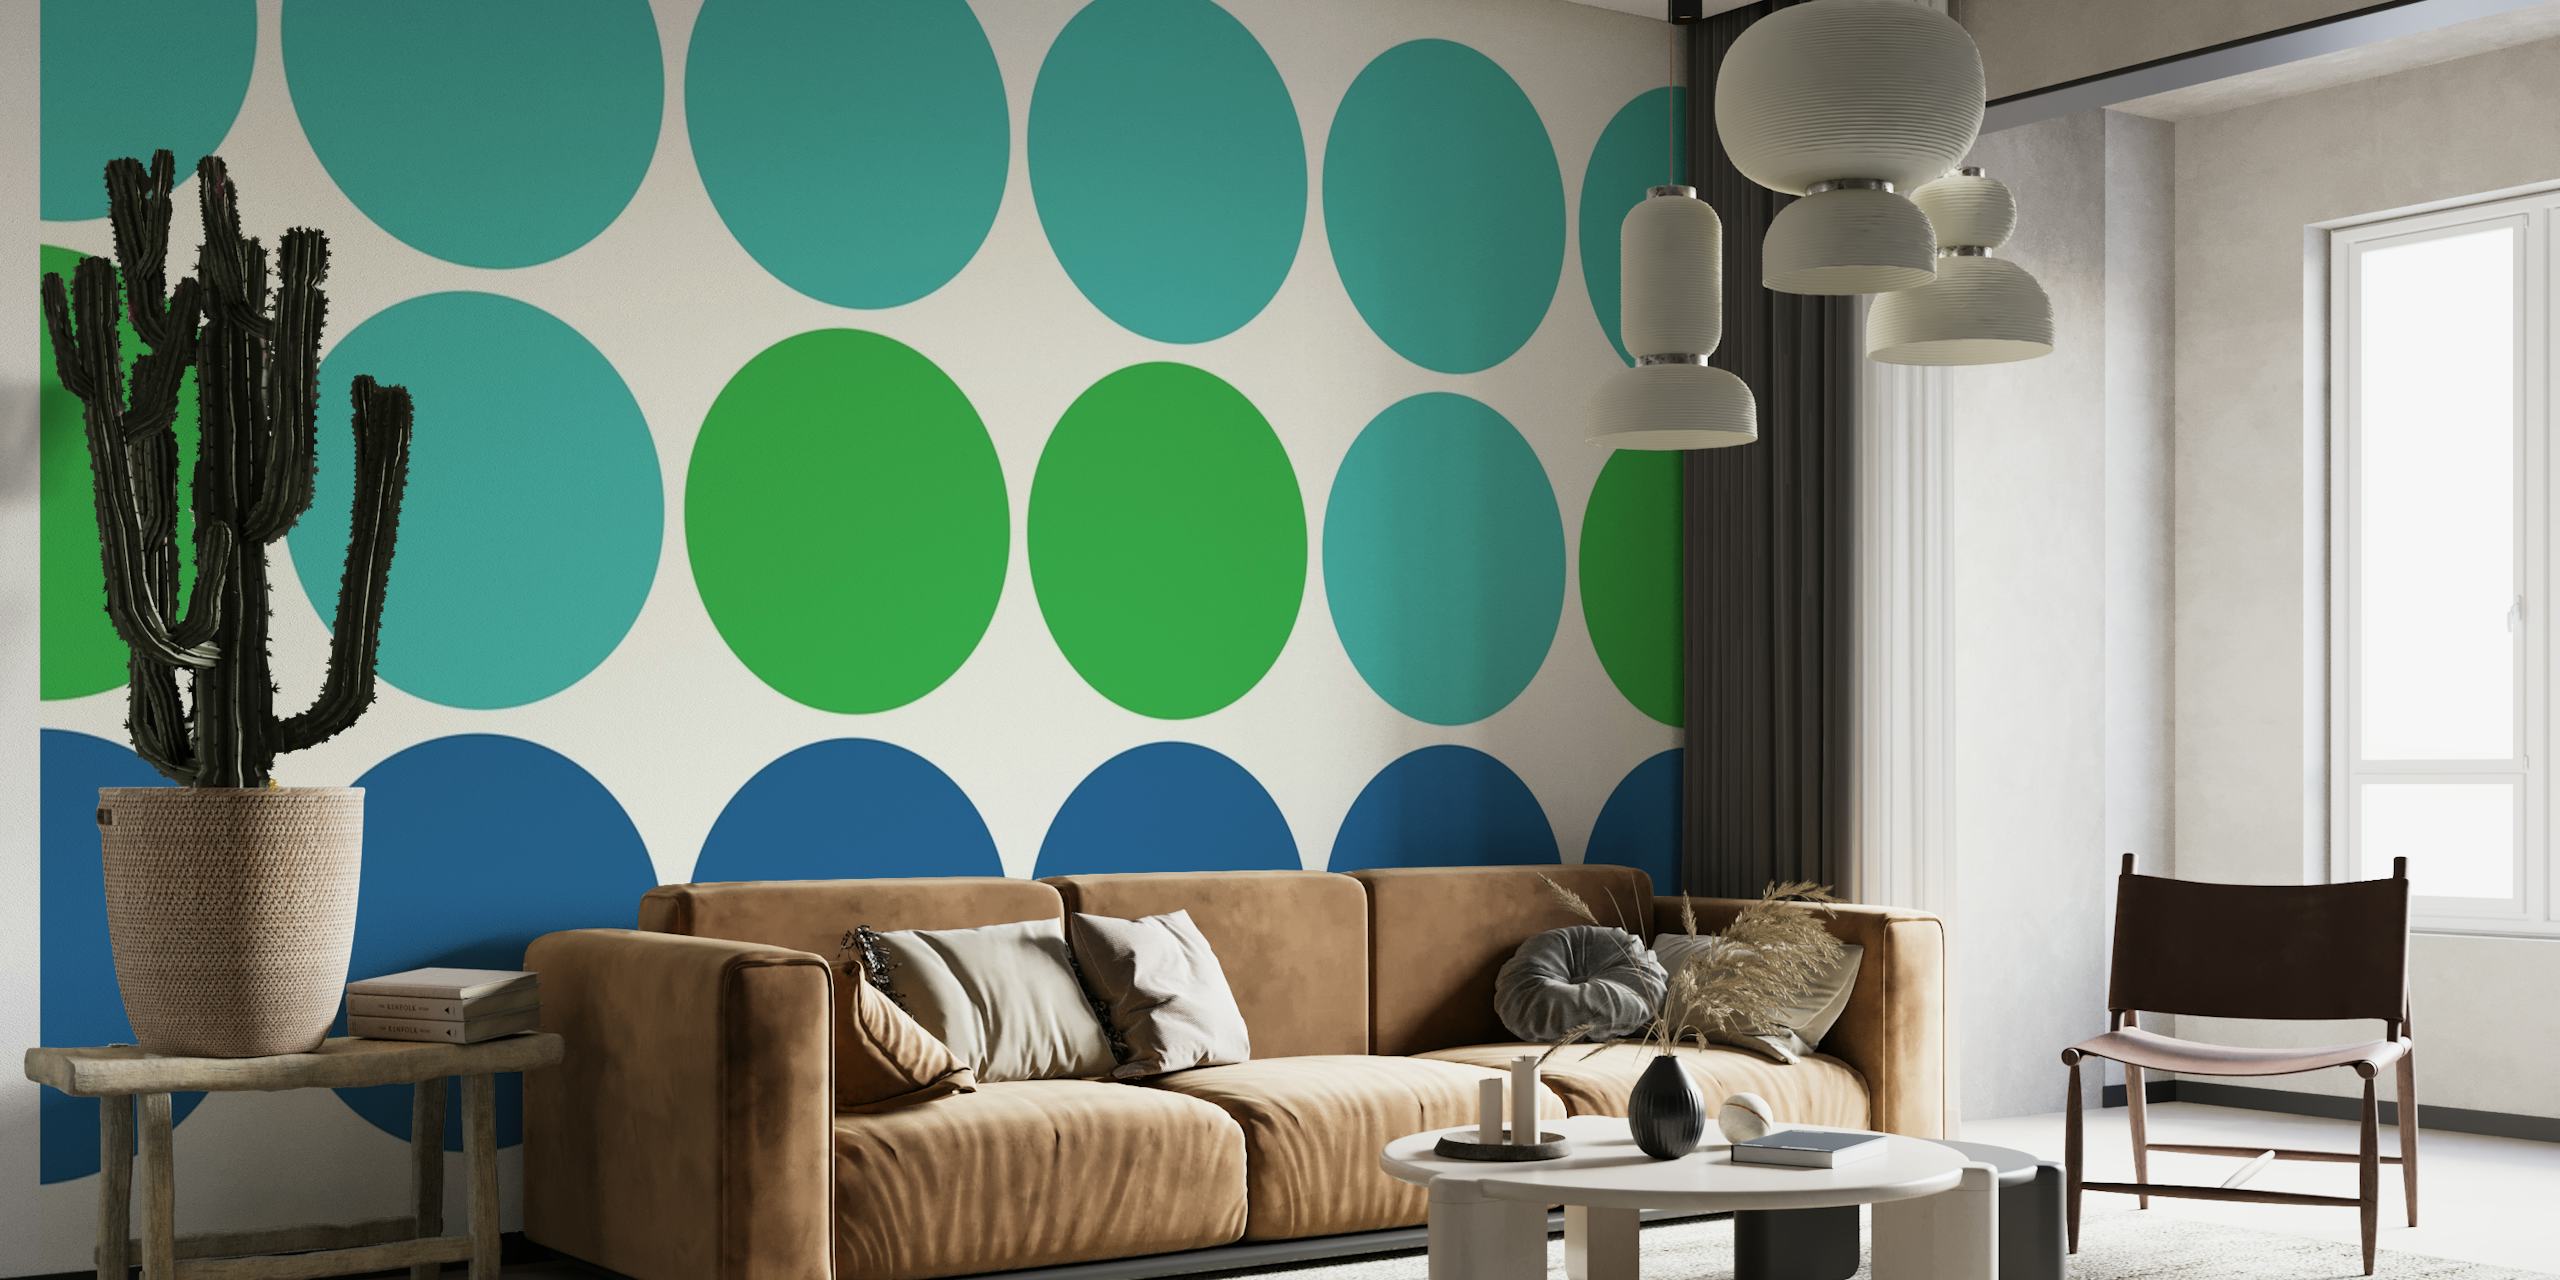 Geometric circle pattern wall mural in shades of turquoise, navy, and green